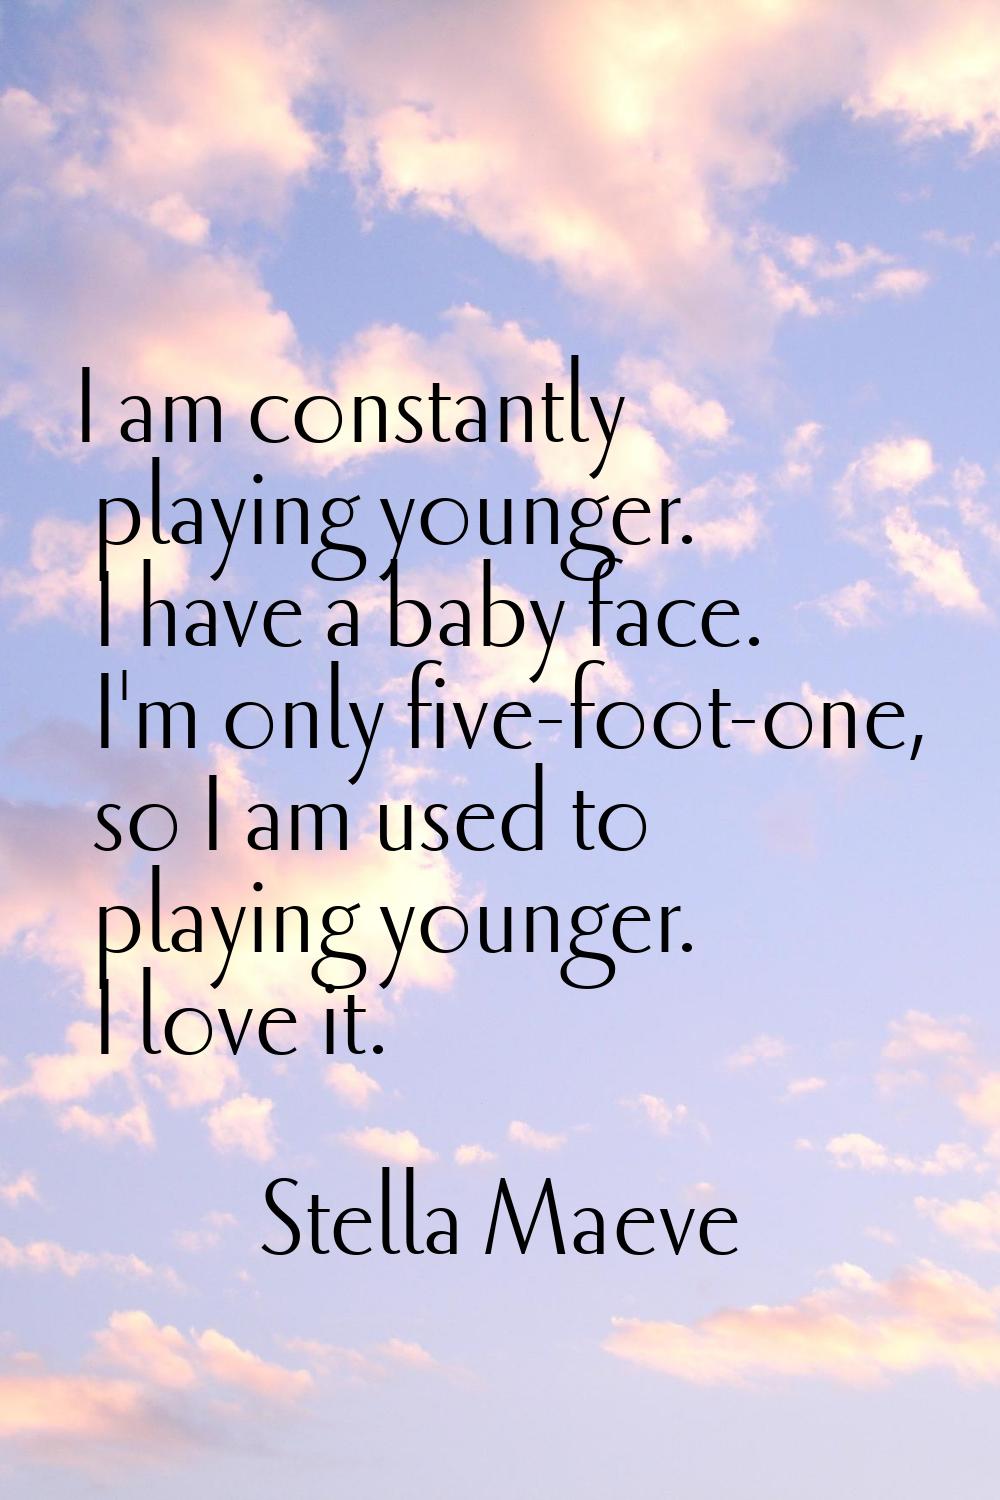 I am constantly playing younger. I have a baby face. I'm only five-foot-one, so I am used to playin